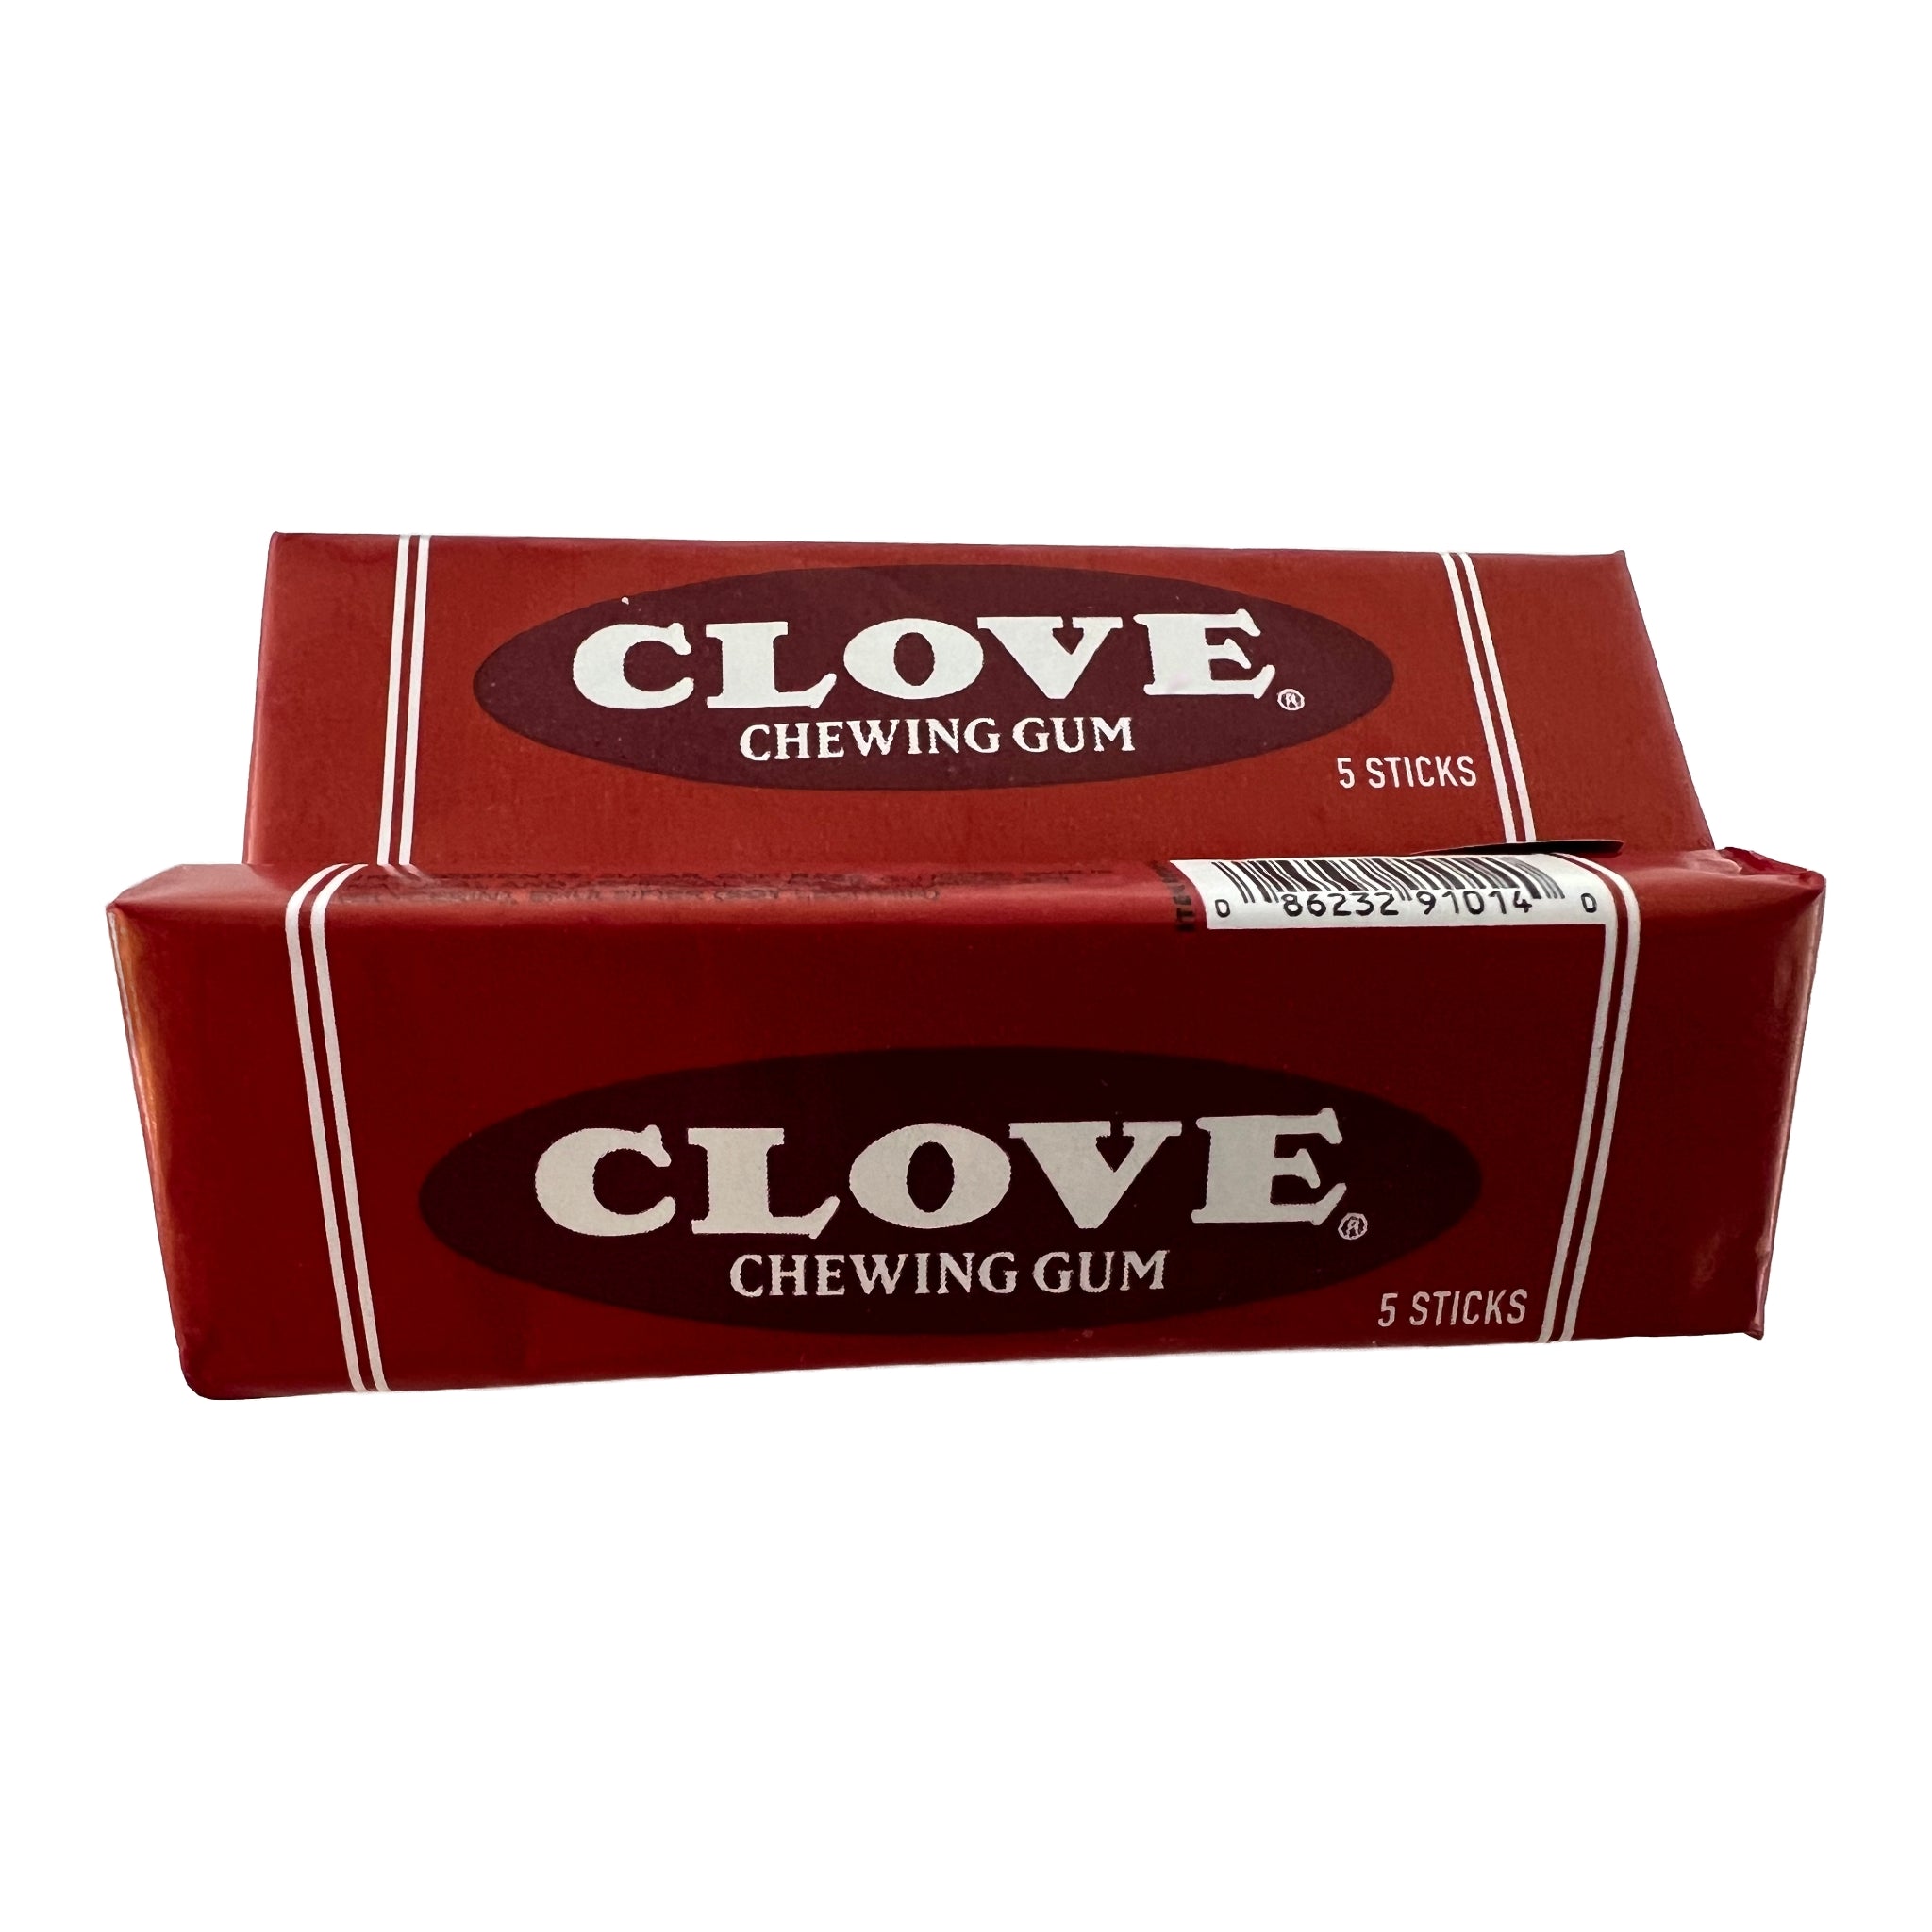 Clove Gum.  This red package with the name of the Clove Chewing Gum in a burgundy oval has five sticks of gum in the package.